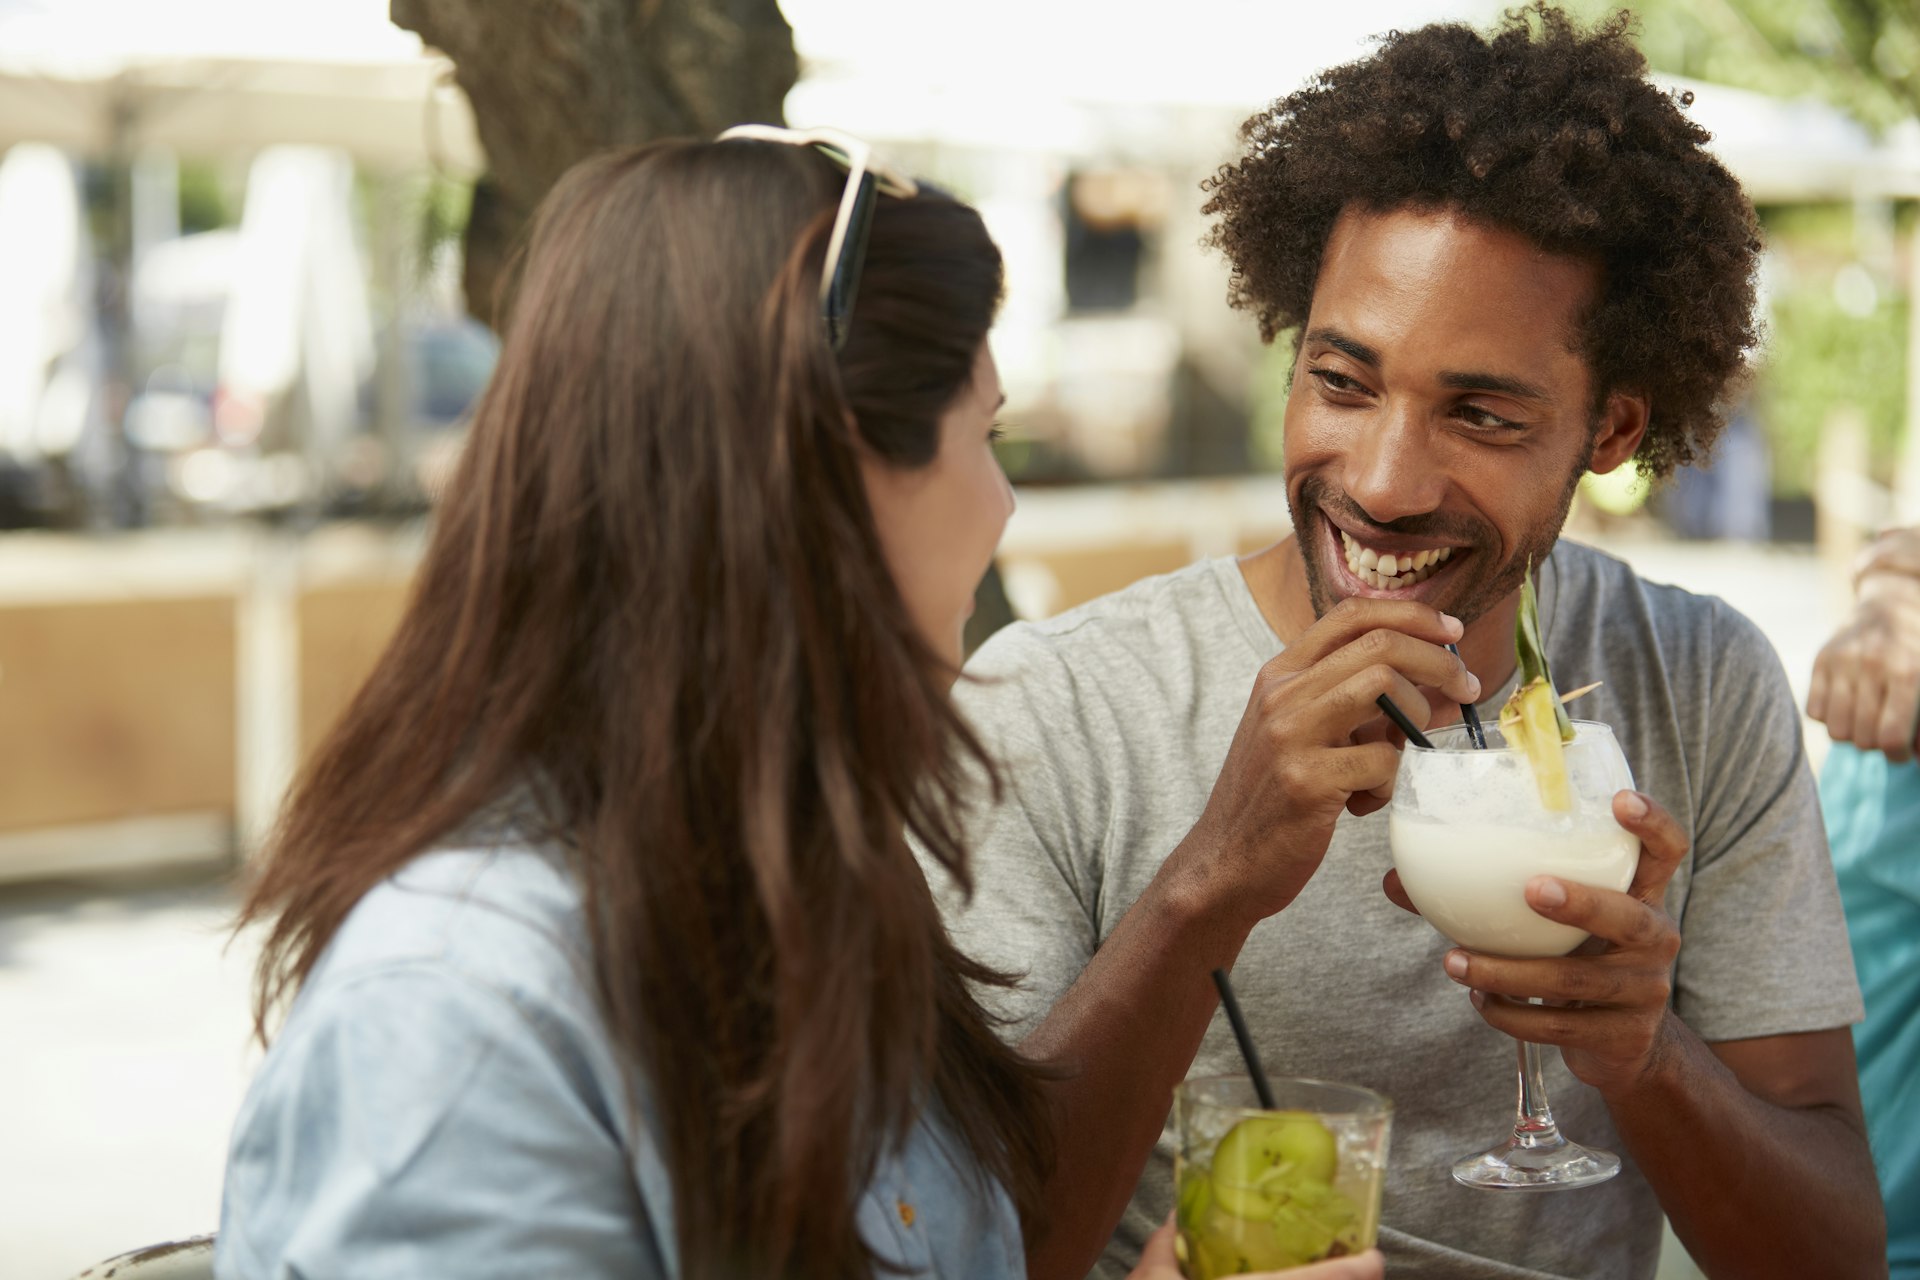 A Black man and a white woman laughing and smiling together as they have drinks at an outside bar